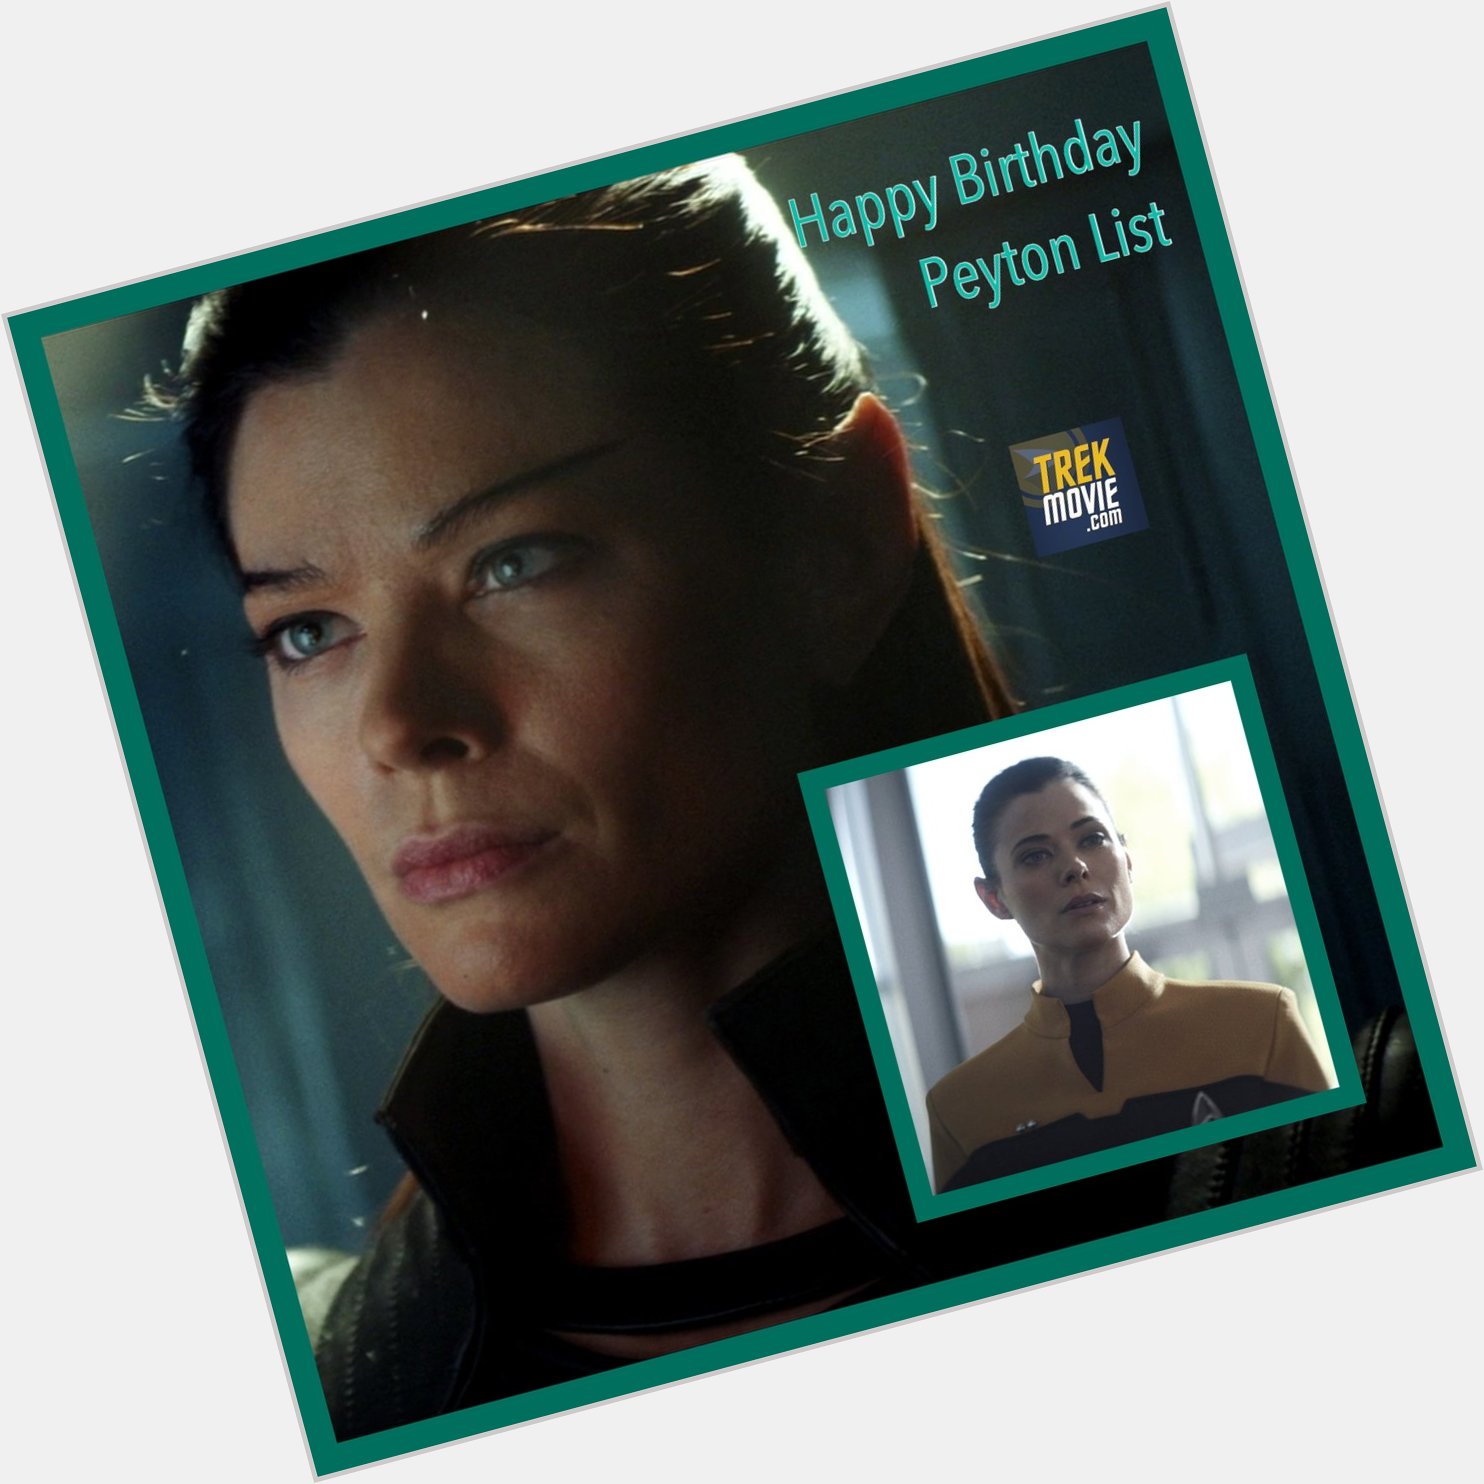 Happy birthday to Peyton List, who played Narissa in the first season of   